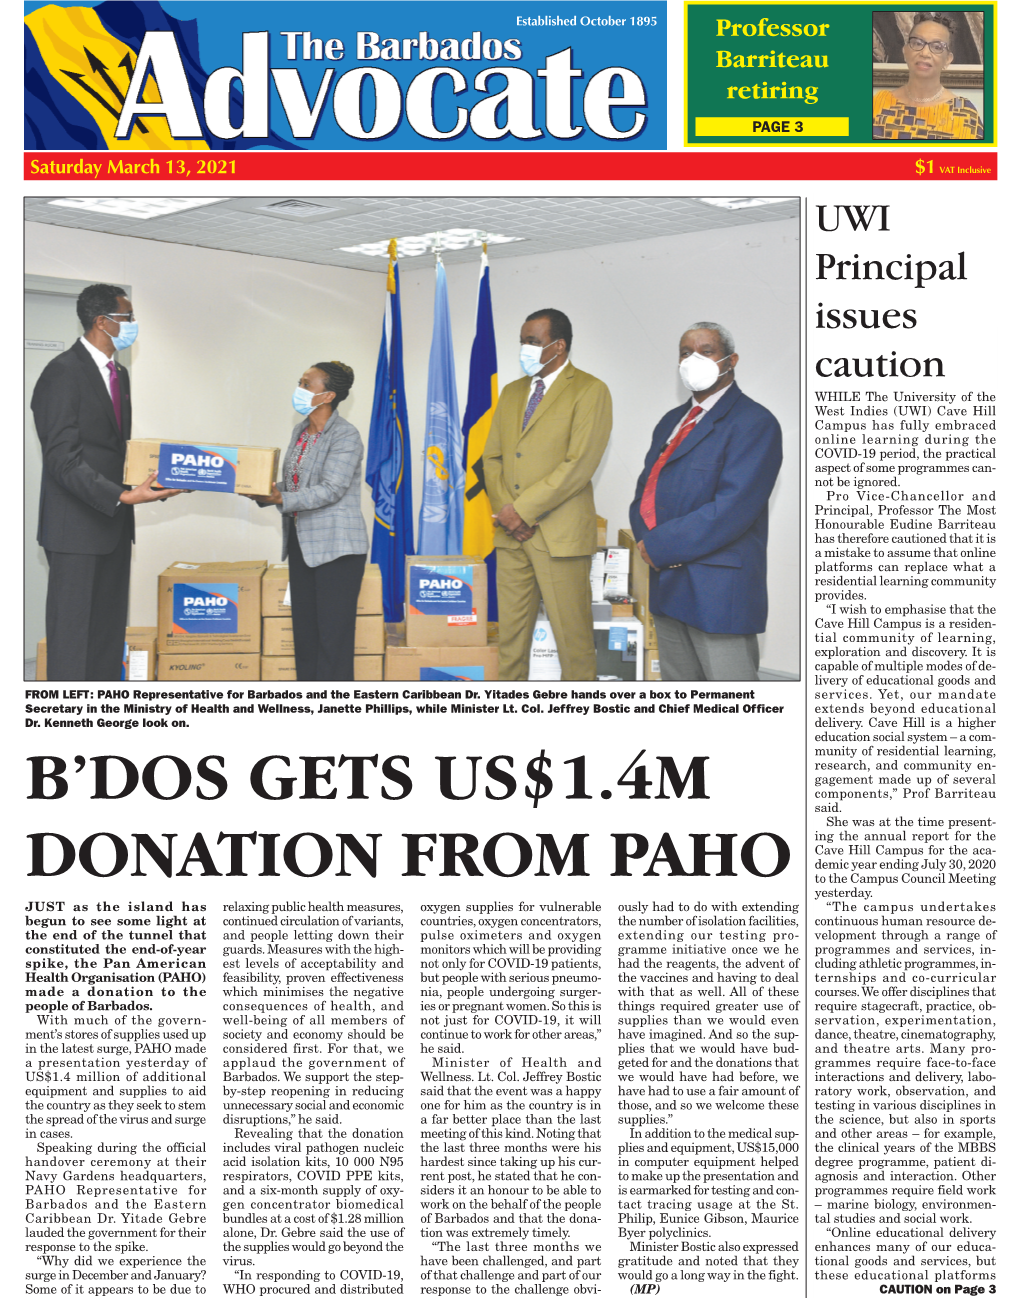 B'dos Gets Us$1.4M Donation from Paho